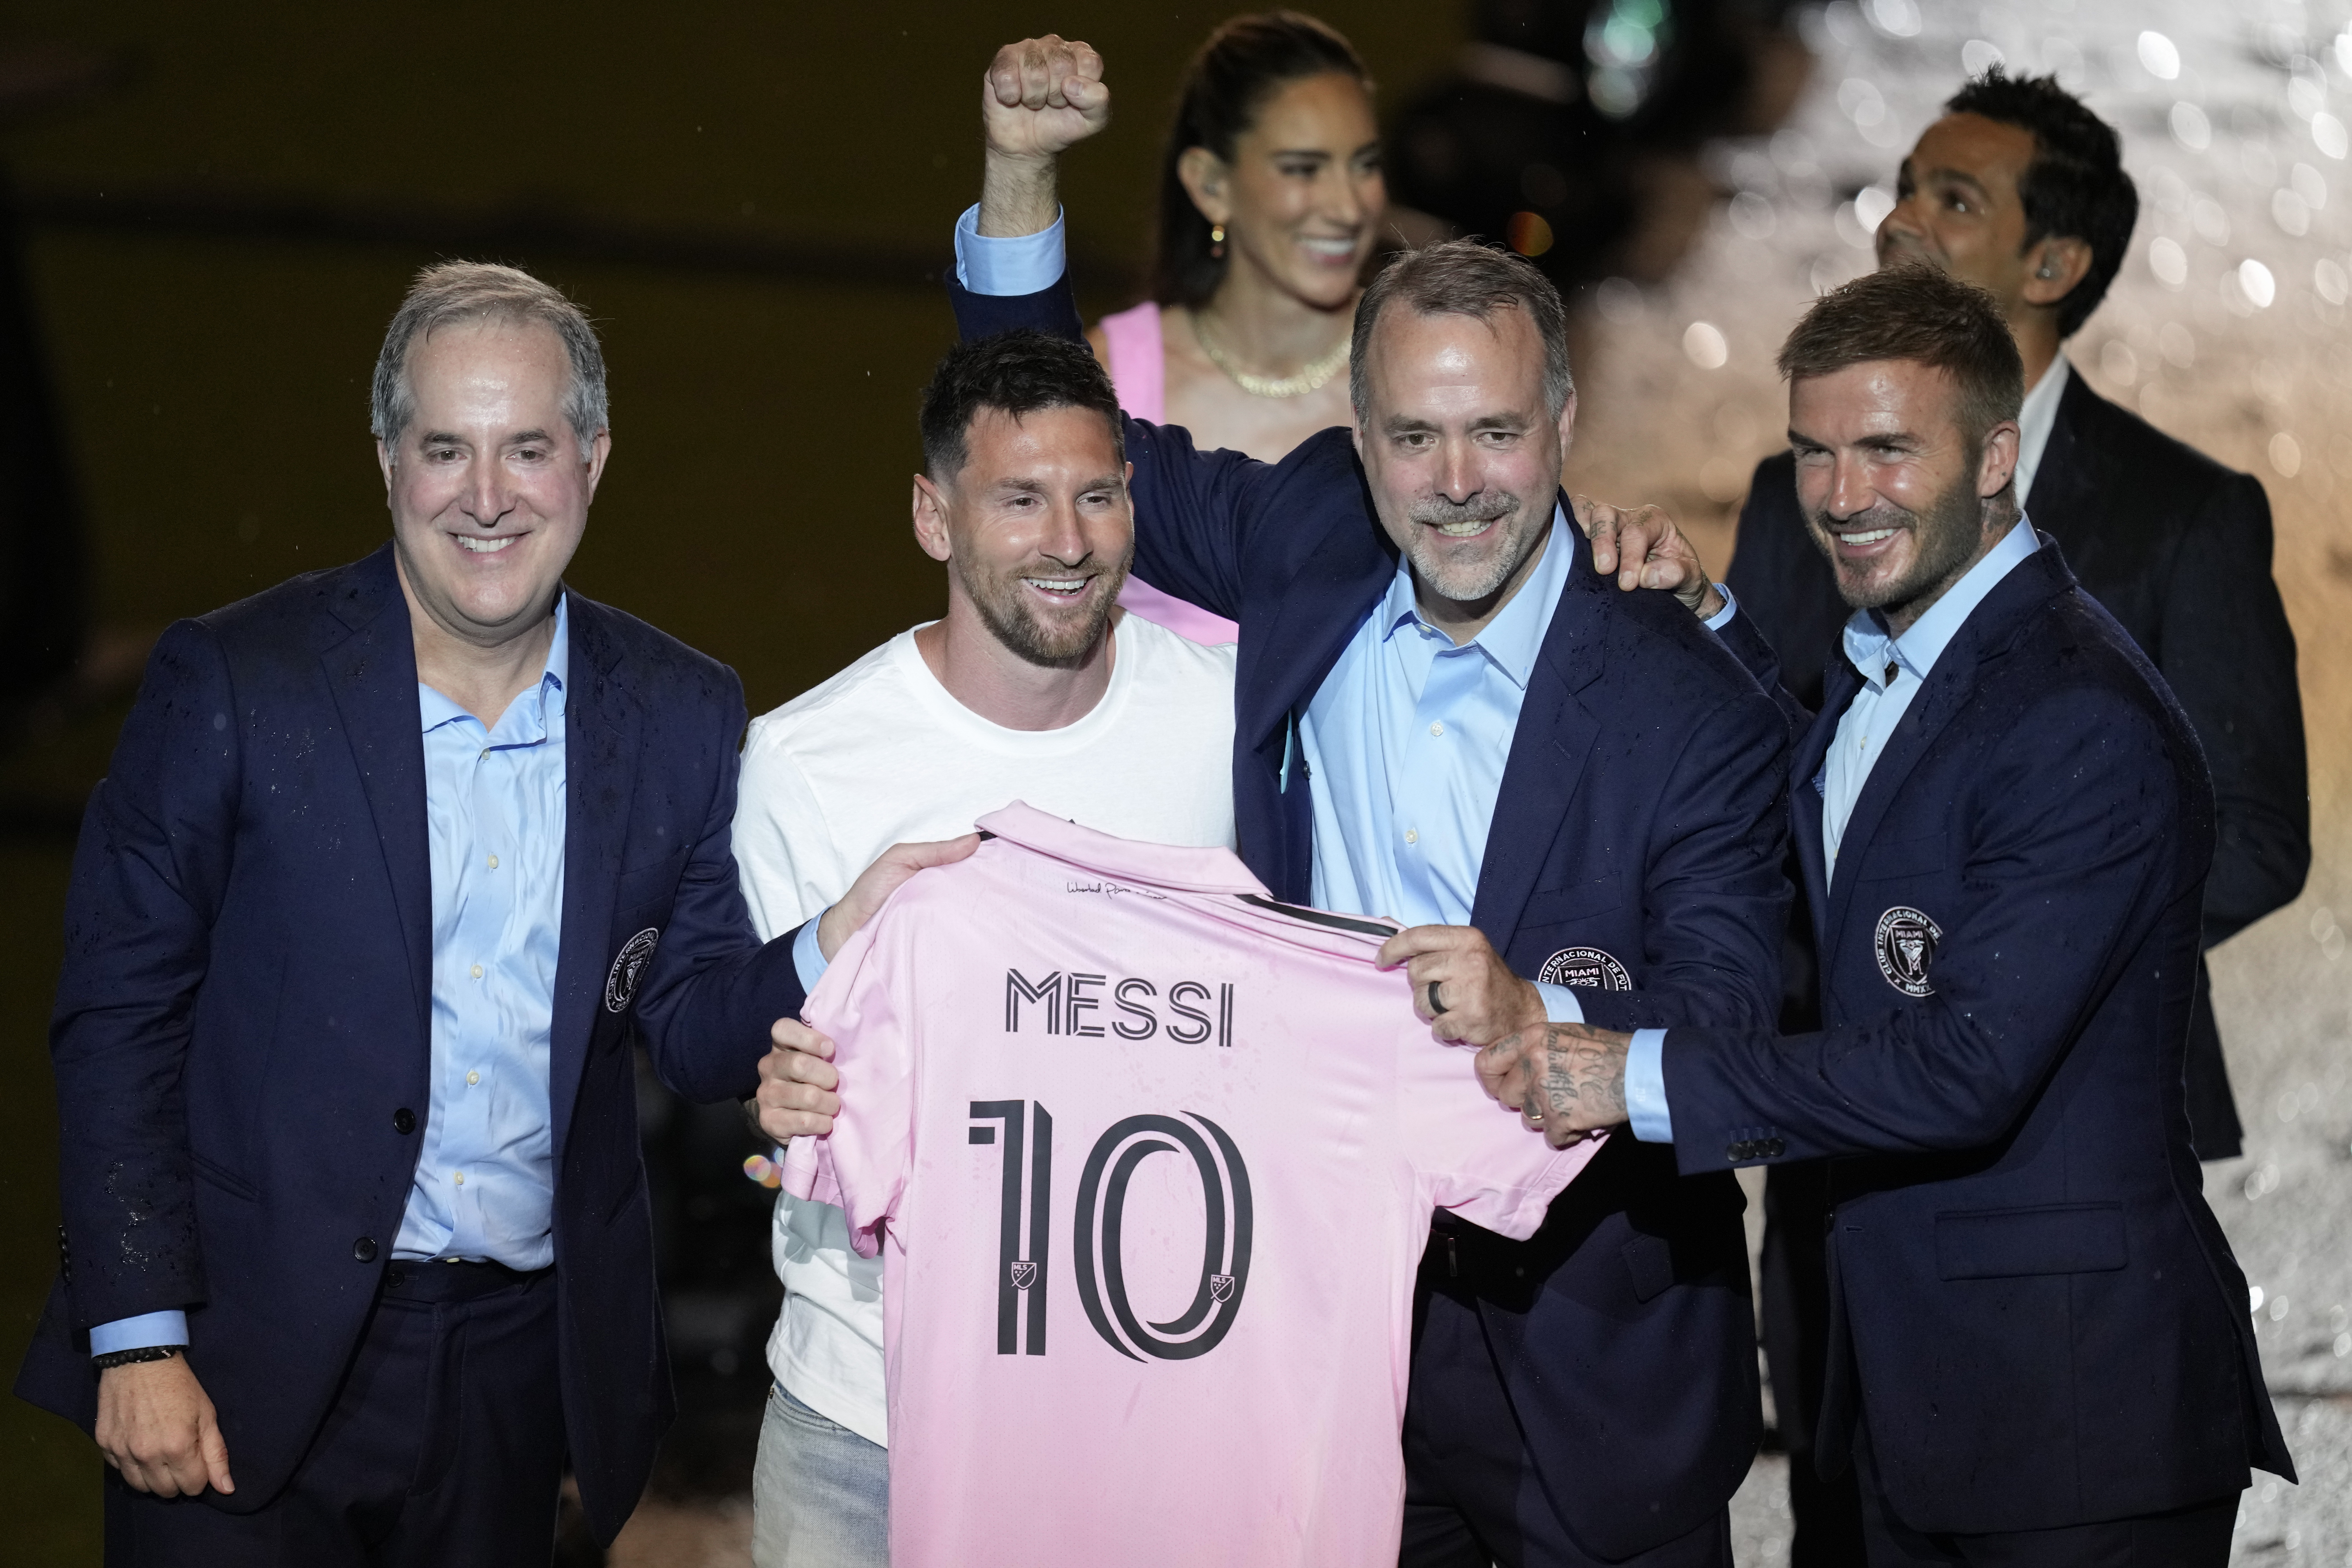 Who makes the best Inter Miami pink jersey? : r/Soccer00